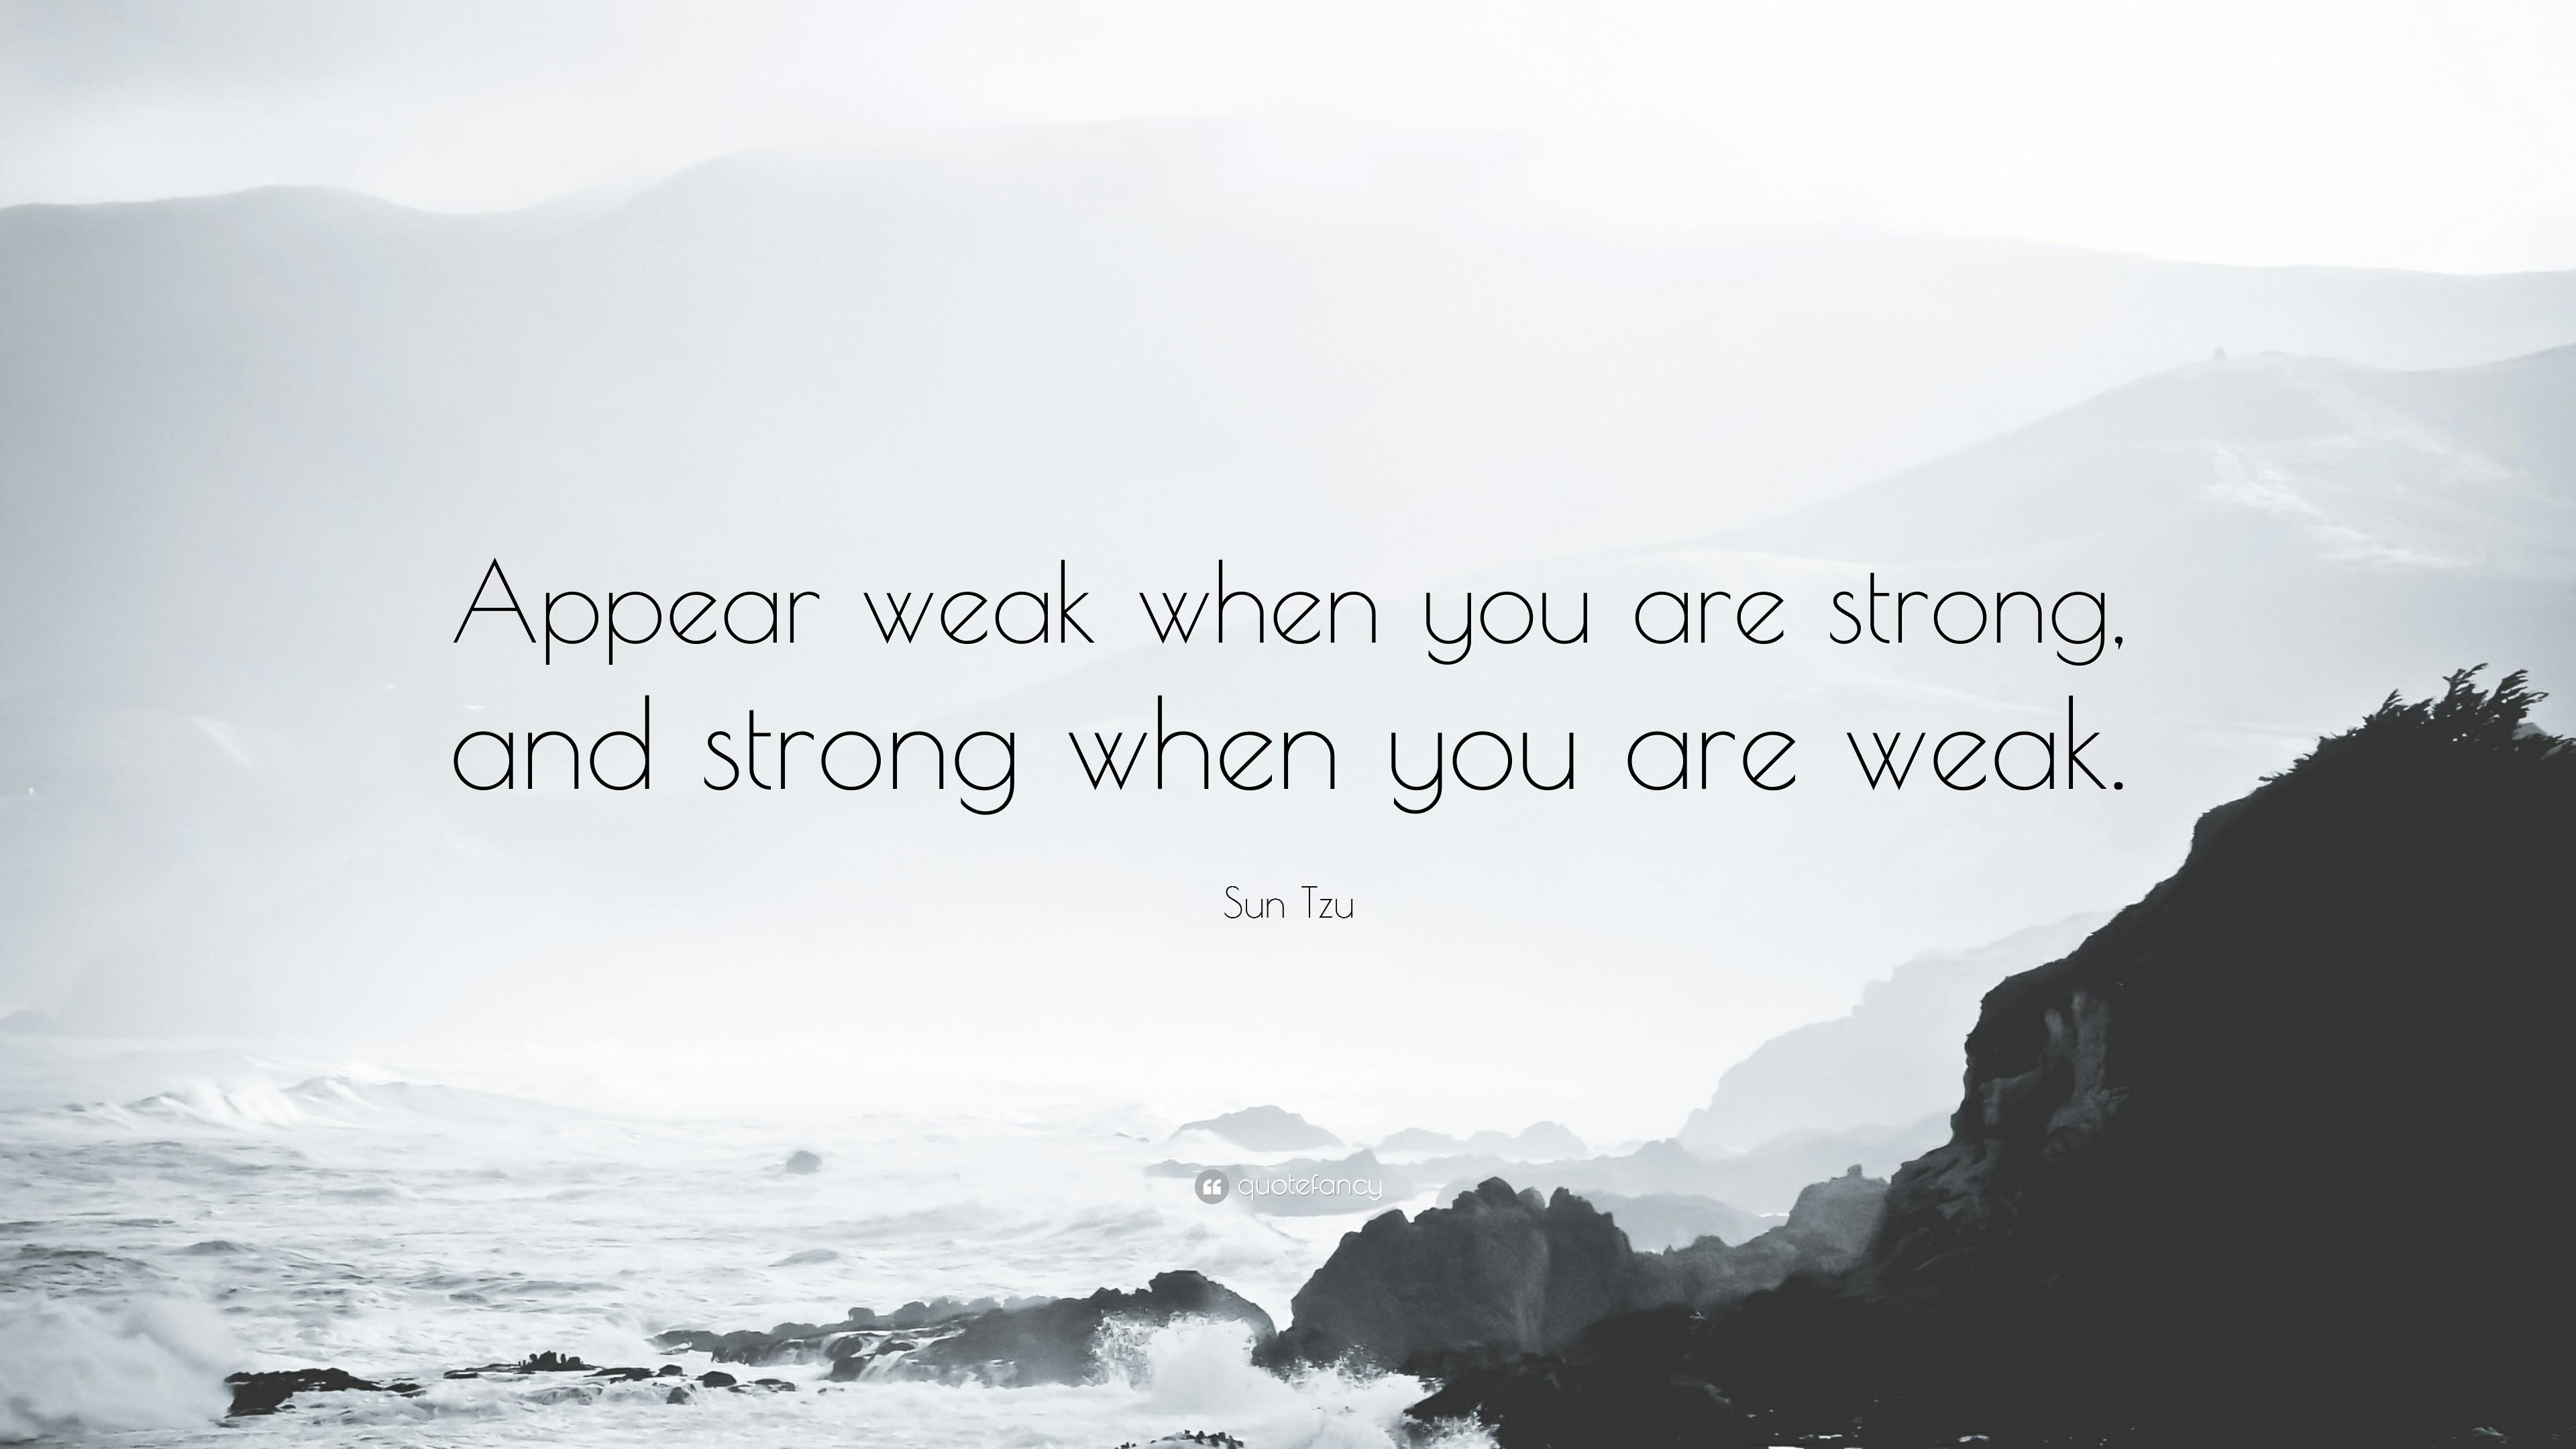 Sun Tzu Quote: “Appear weak when you are strong, and strong